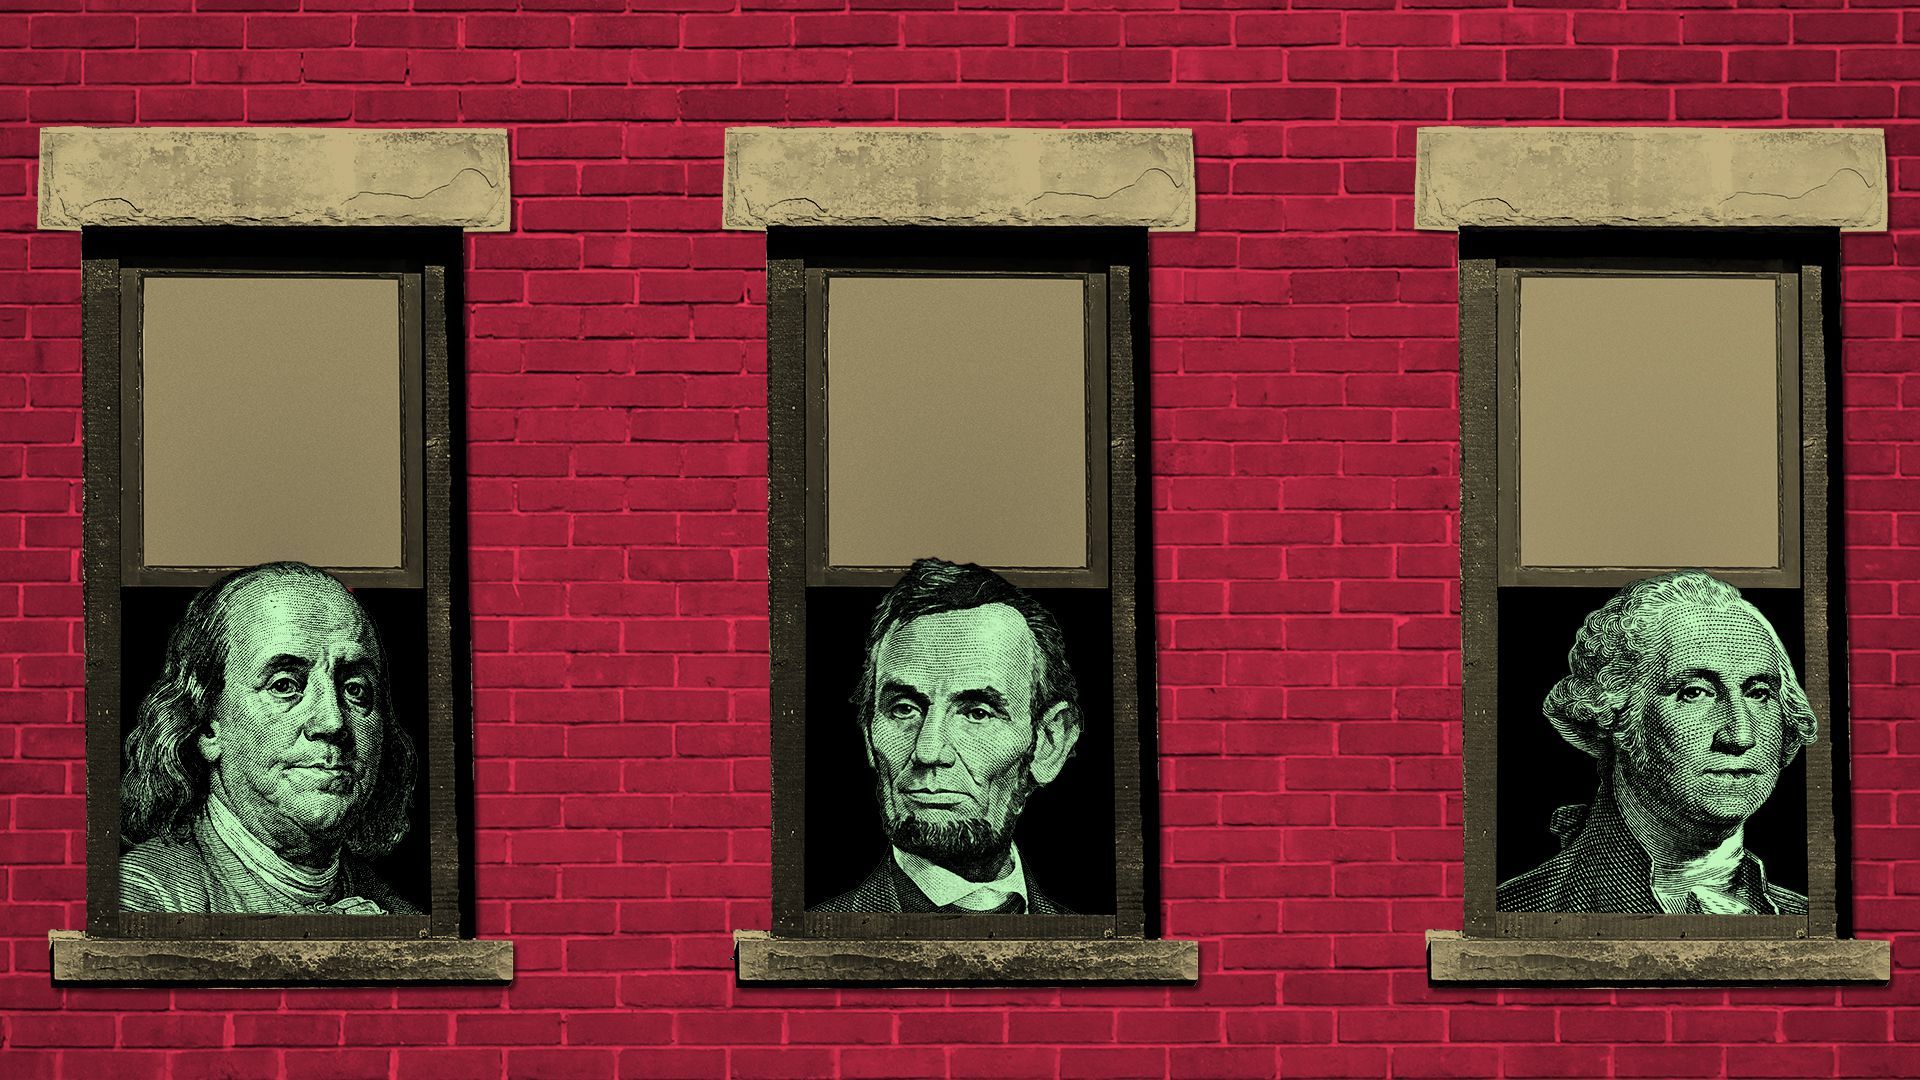 Illustration of three windows on a brick wall, with Ben Franklin, Abraham Lincoln, and George Washington in them.